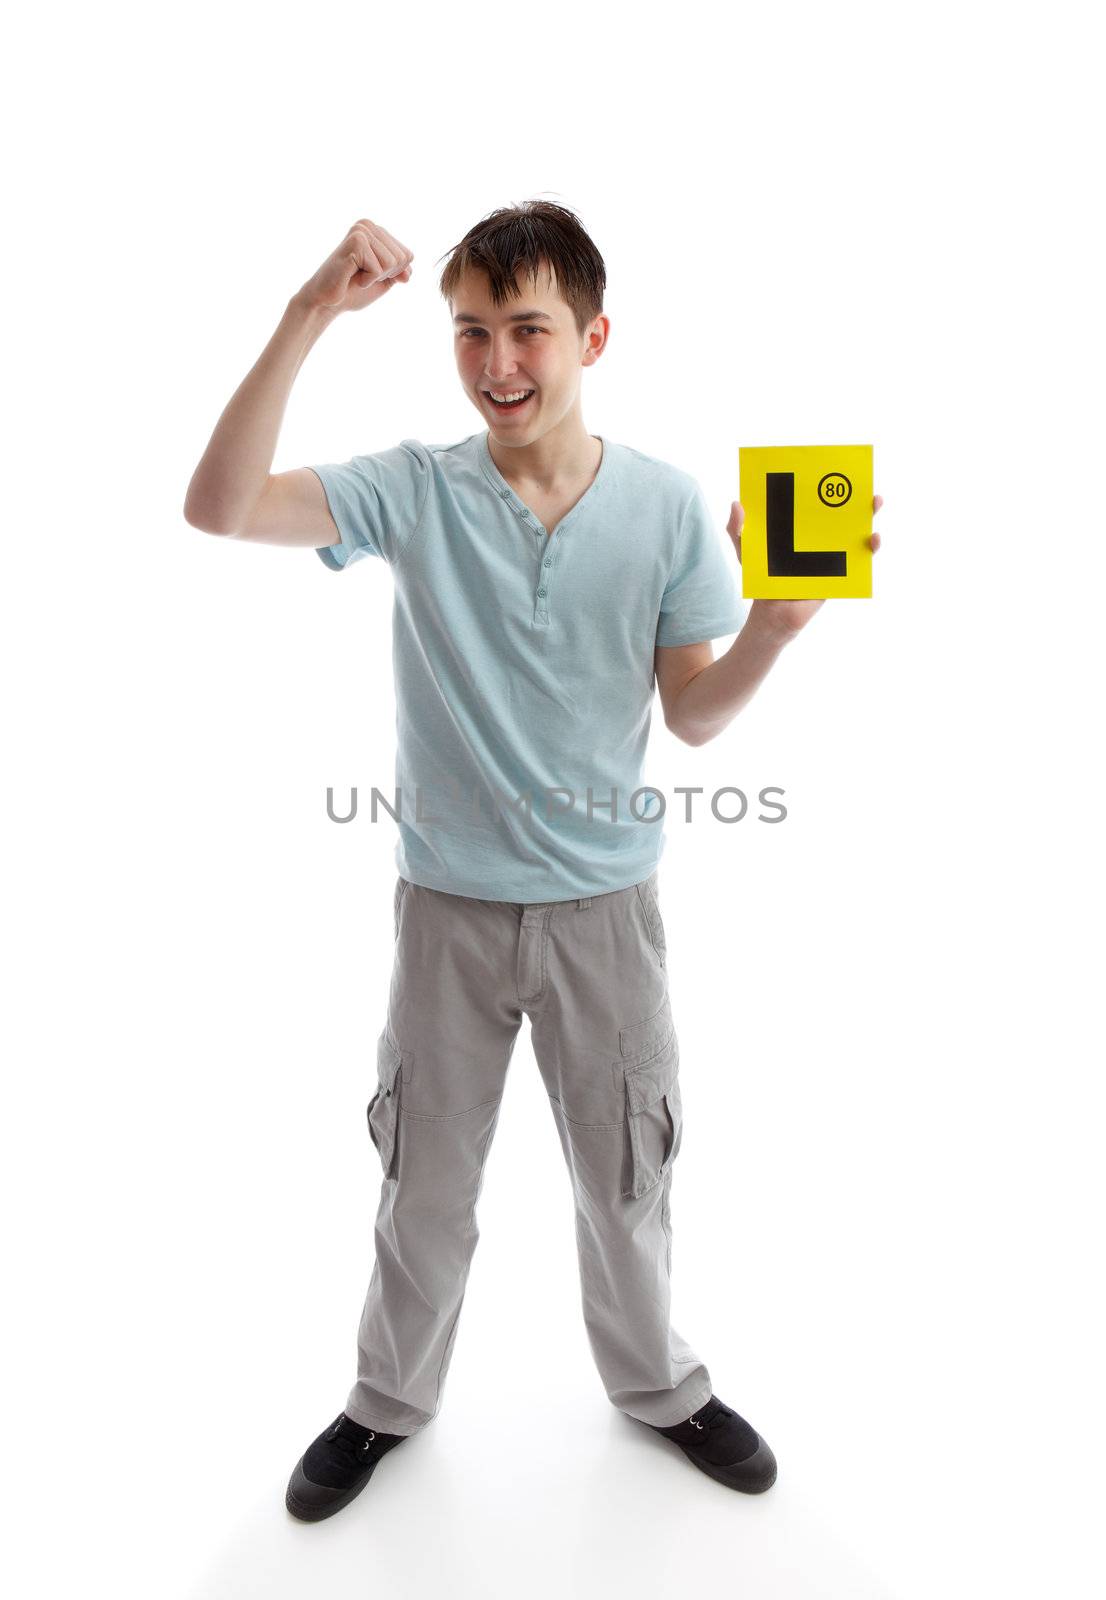 A teen boy holding his L plates (learner driving plates) and showing a fist of success.  White background. Or, plates maybe replaced with your brochure or other object.